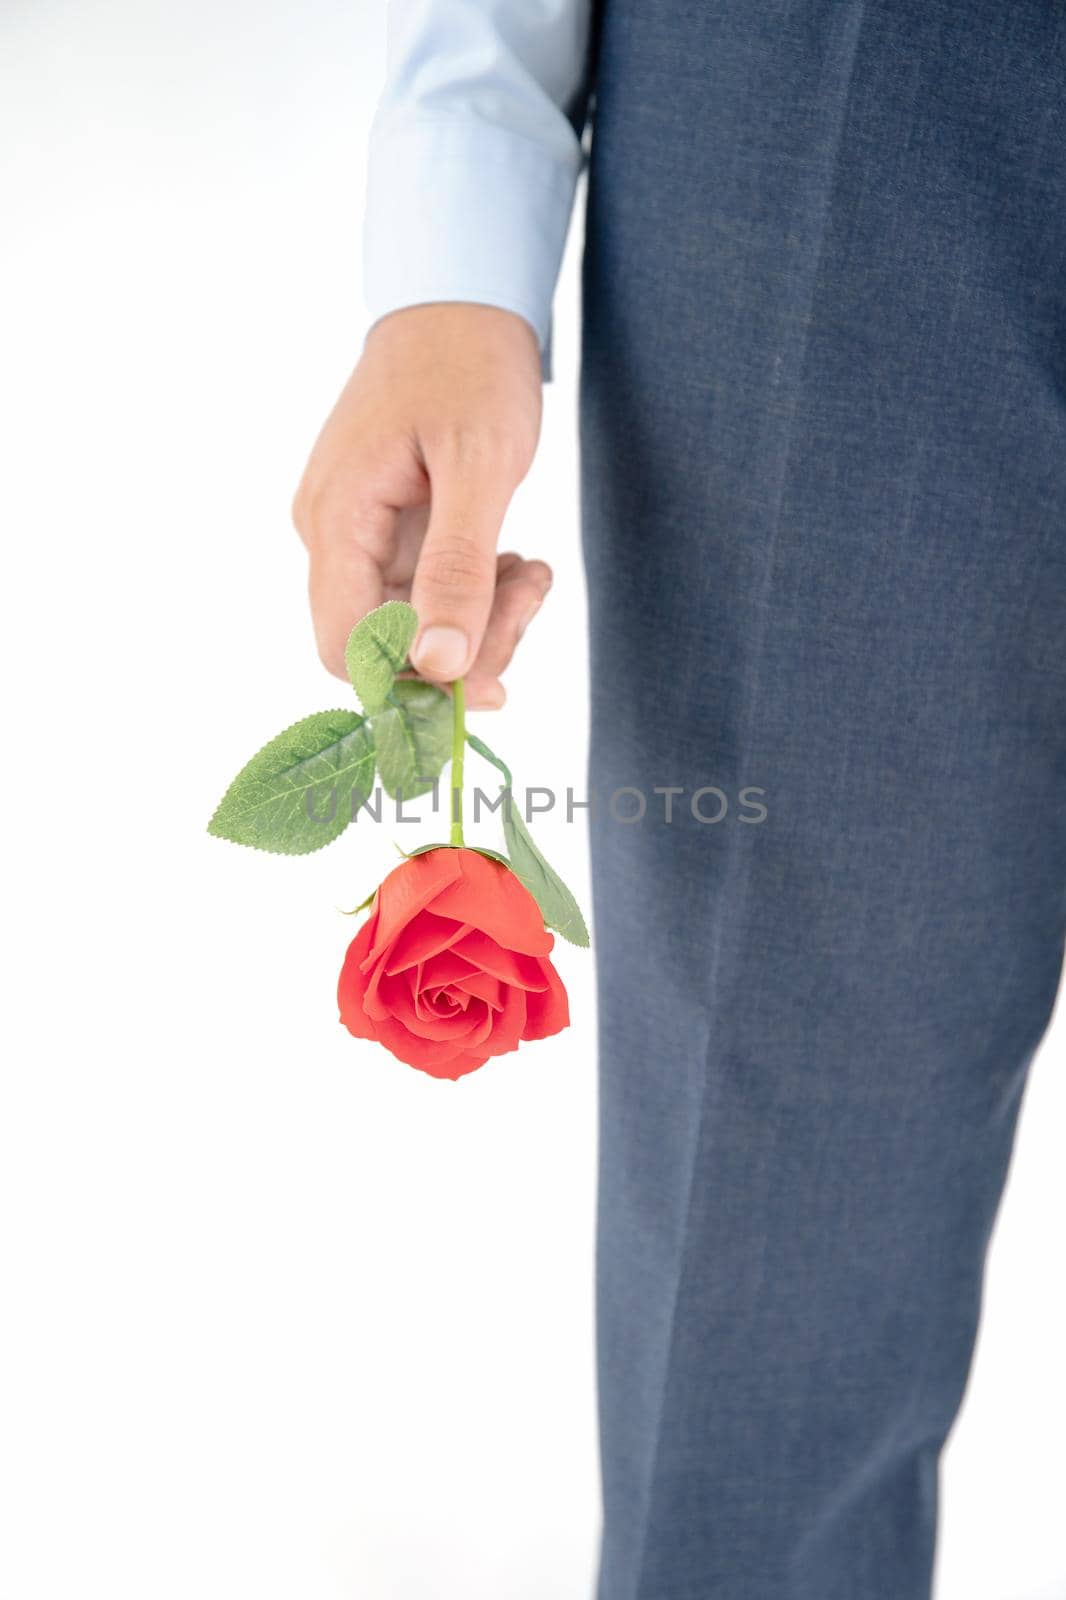 Close up photo of man holding with red rose on white background